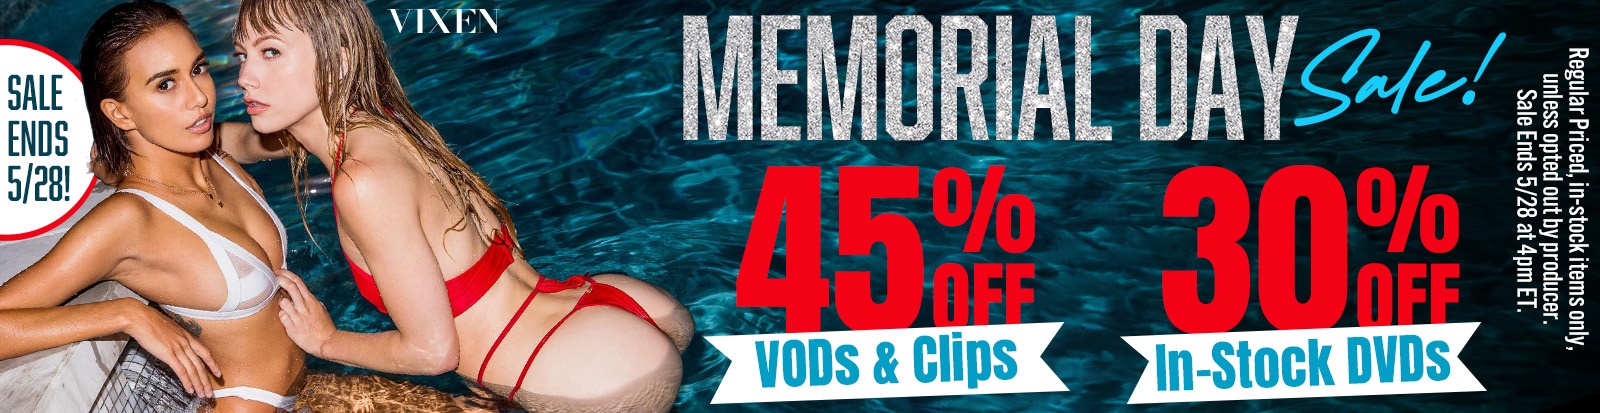 The Vixen Girls are in the Water Getting Playful for the Memorial Day Sale!